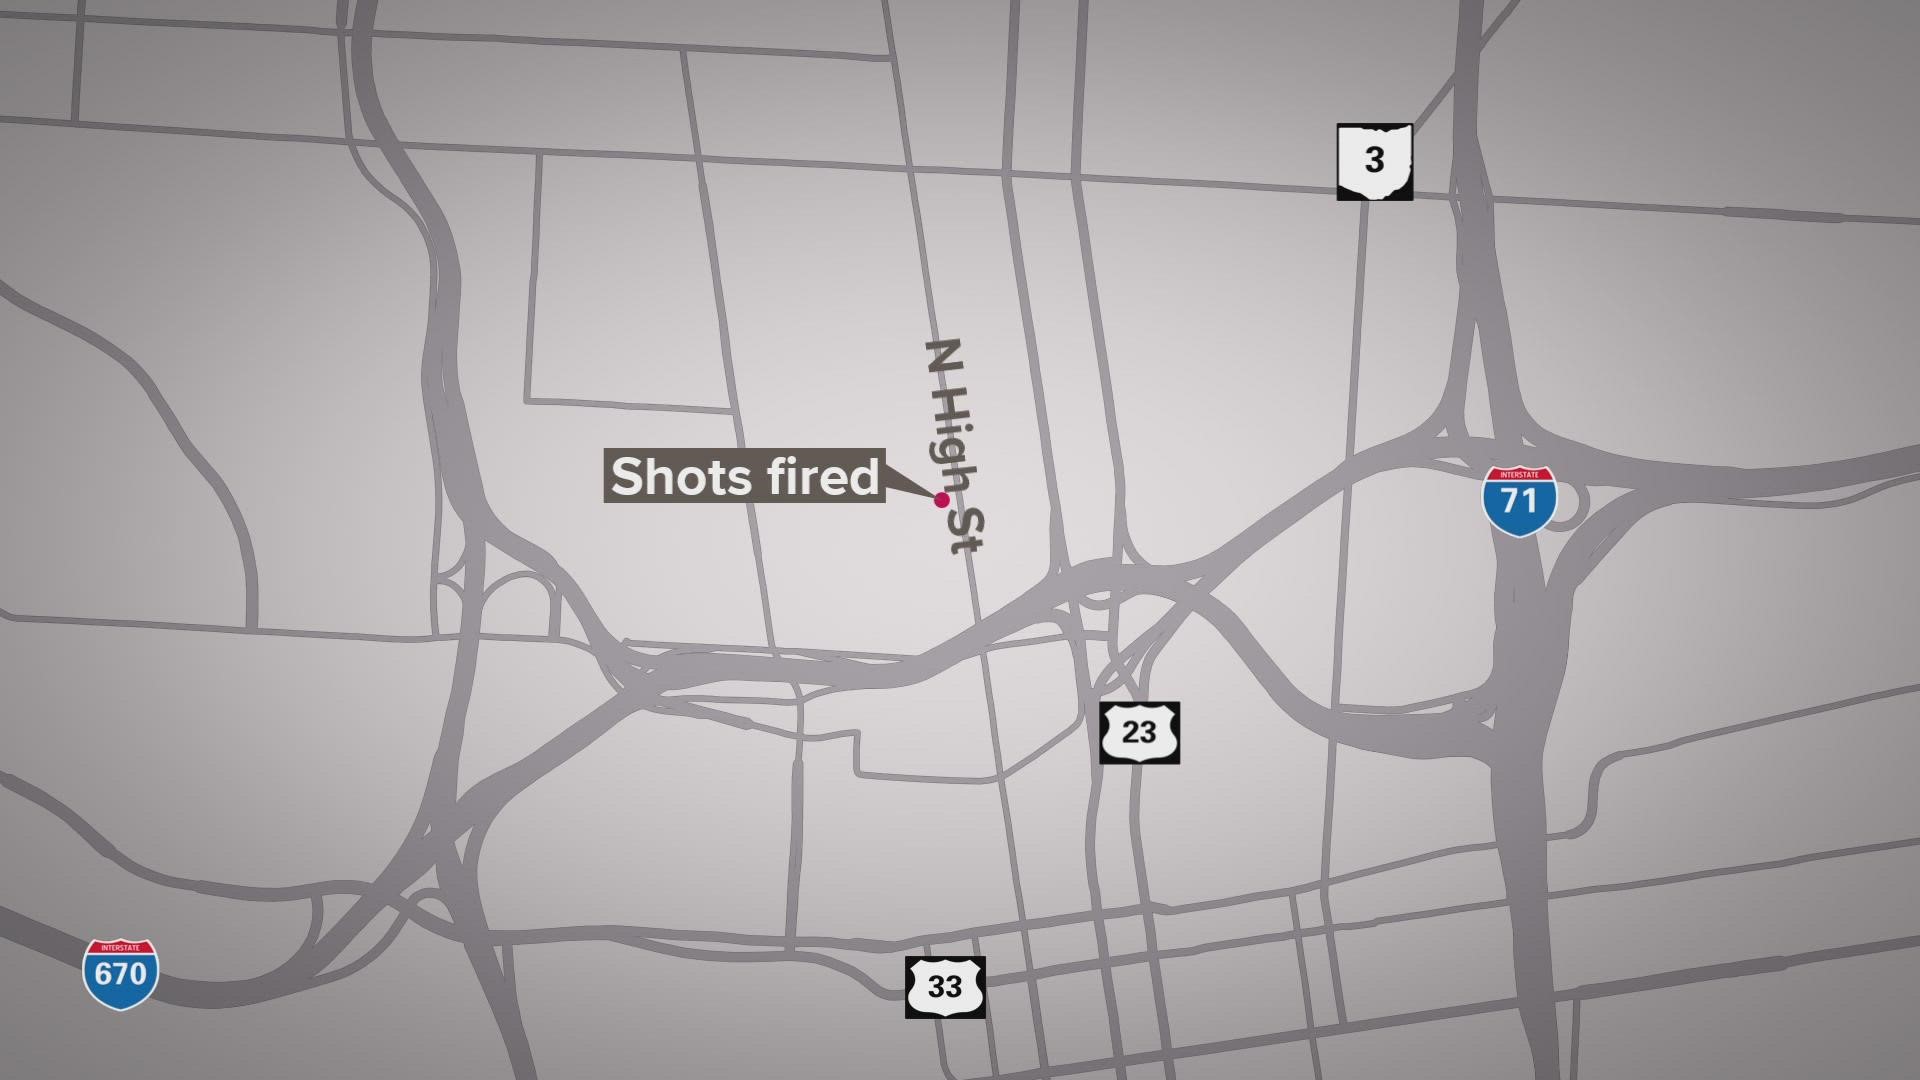 According to Columbus police dispatch, the shots were fired in the 700 block of North High Street.